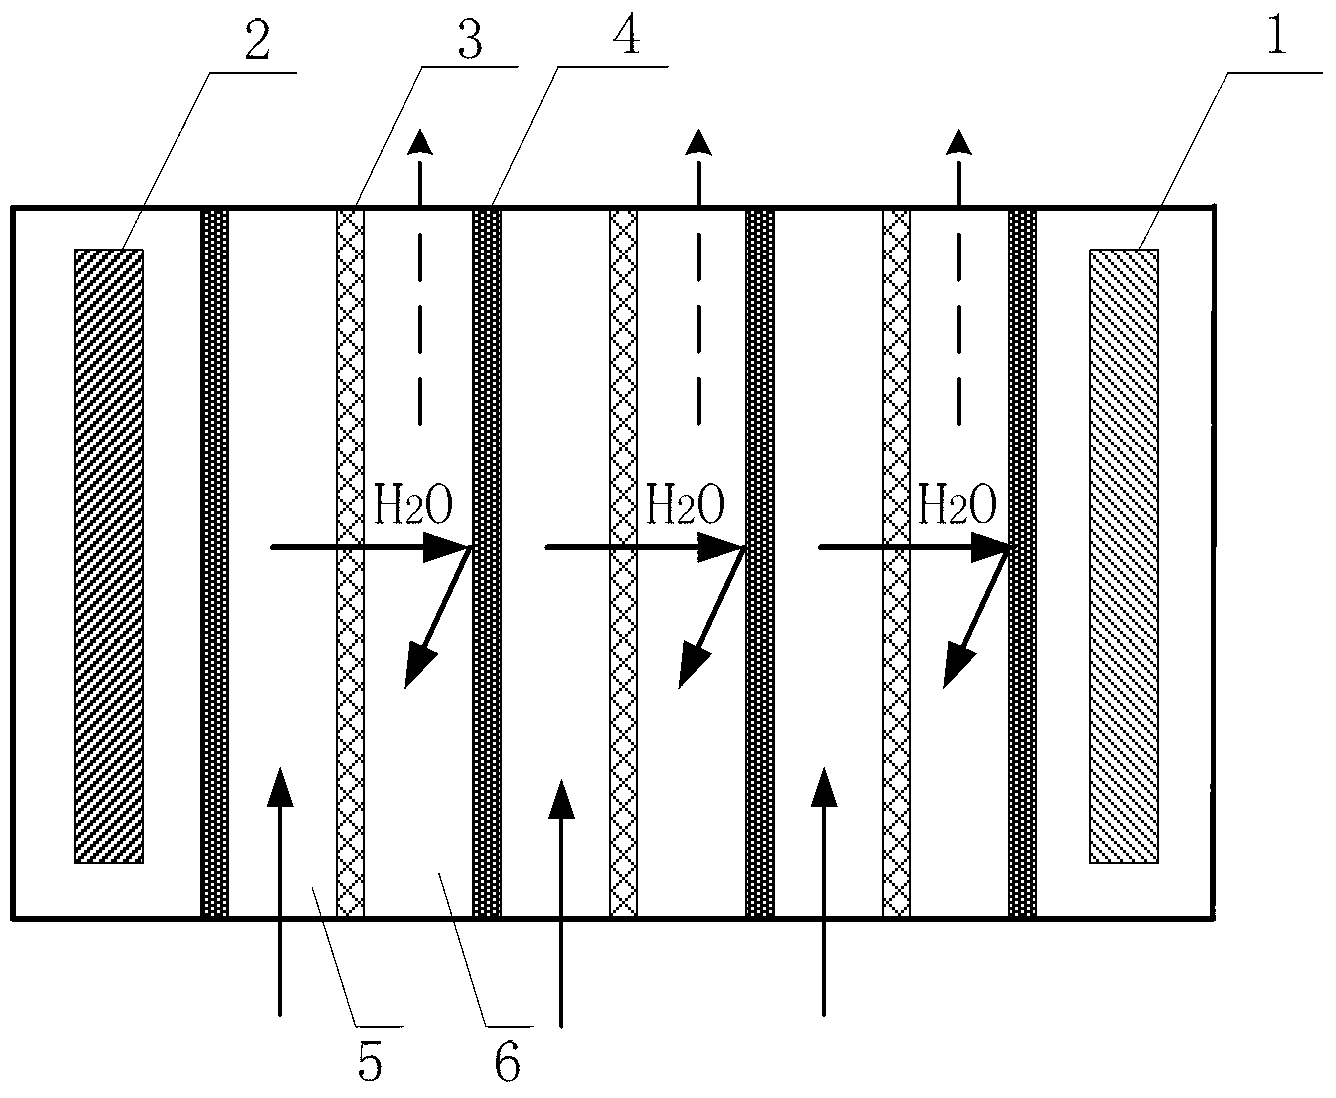 Air dehumidification device based on electrodialysis